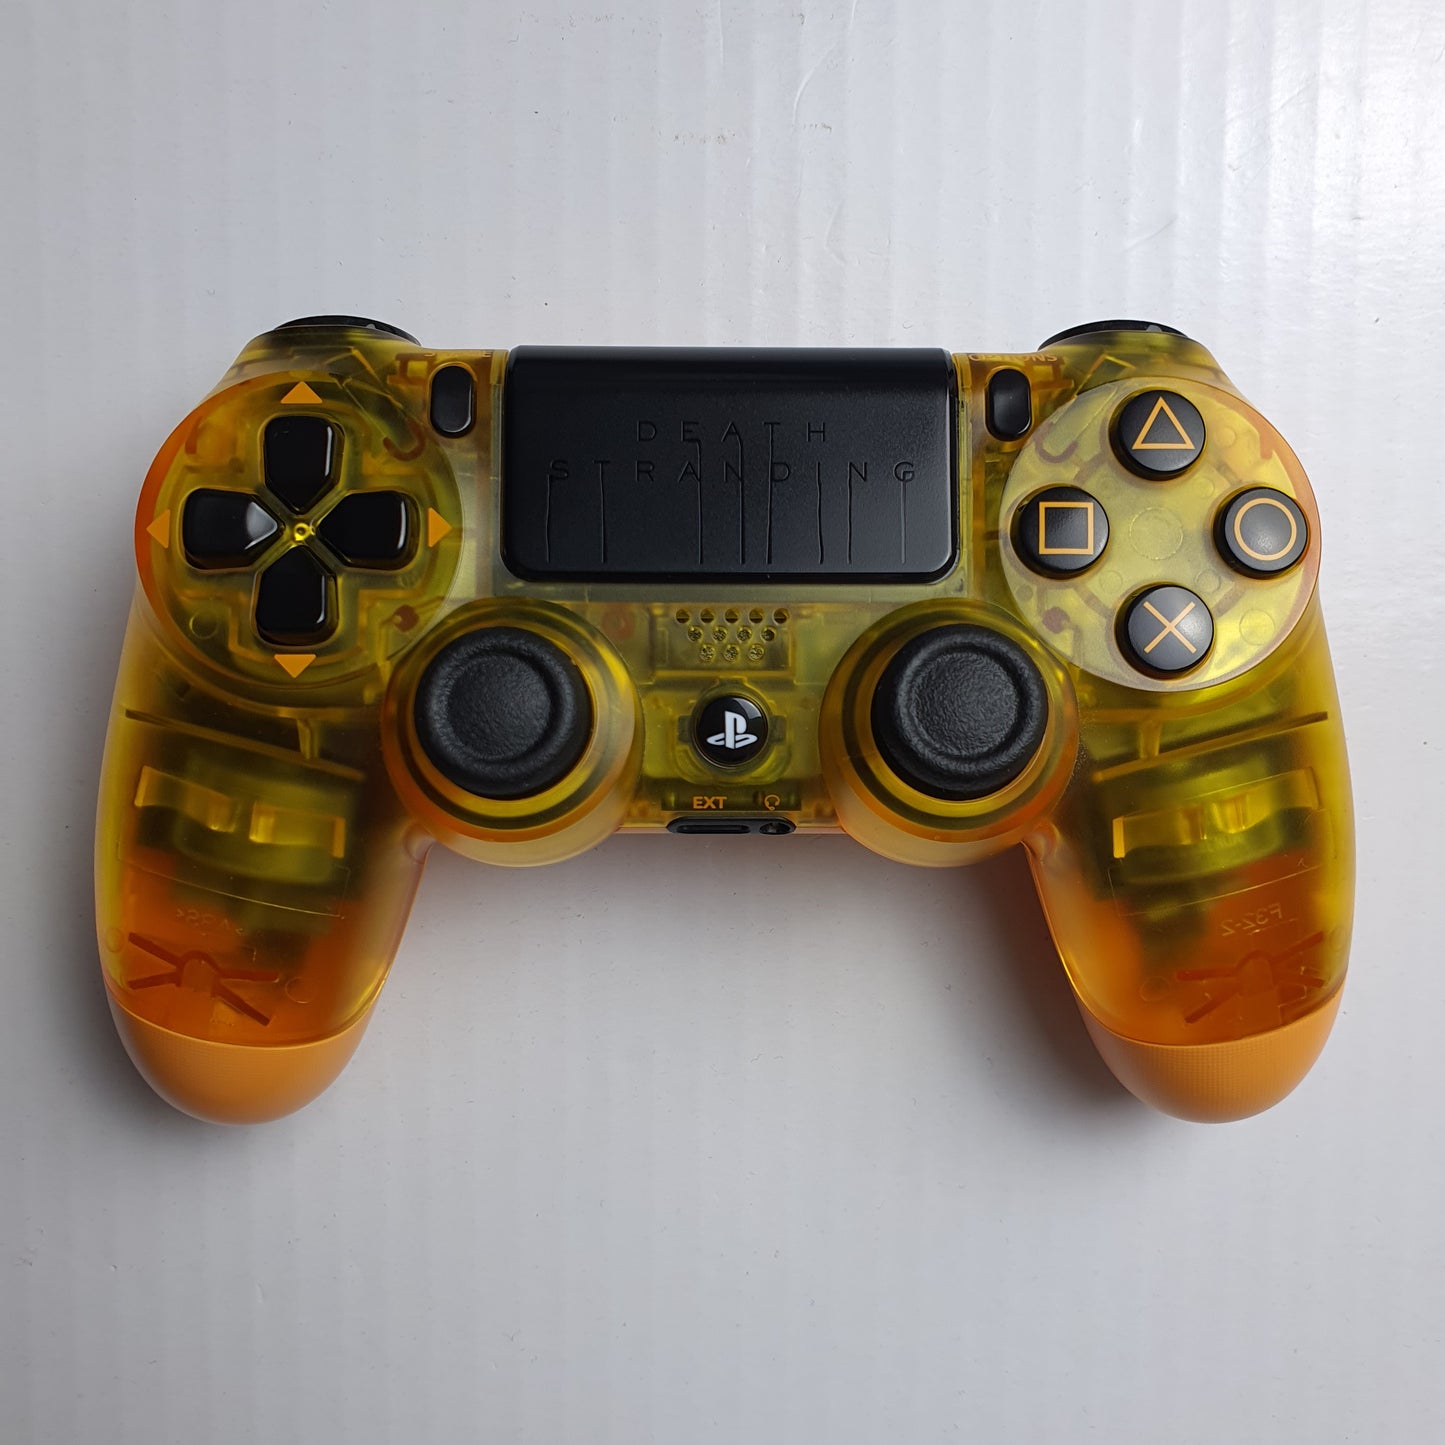 Sony DUALSHOCK 4 Wireless Controller for PlayStation 4 - Gold